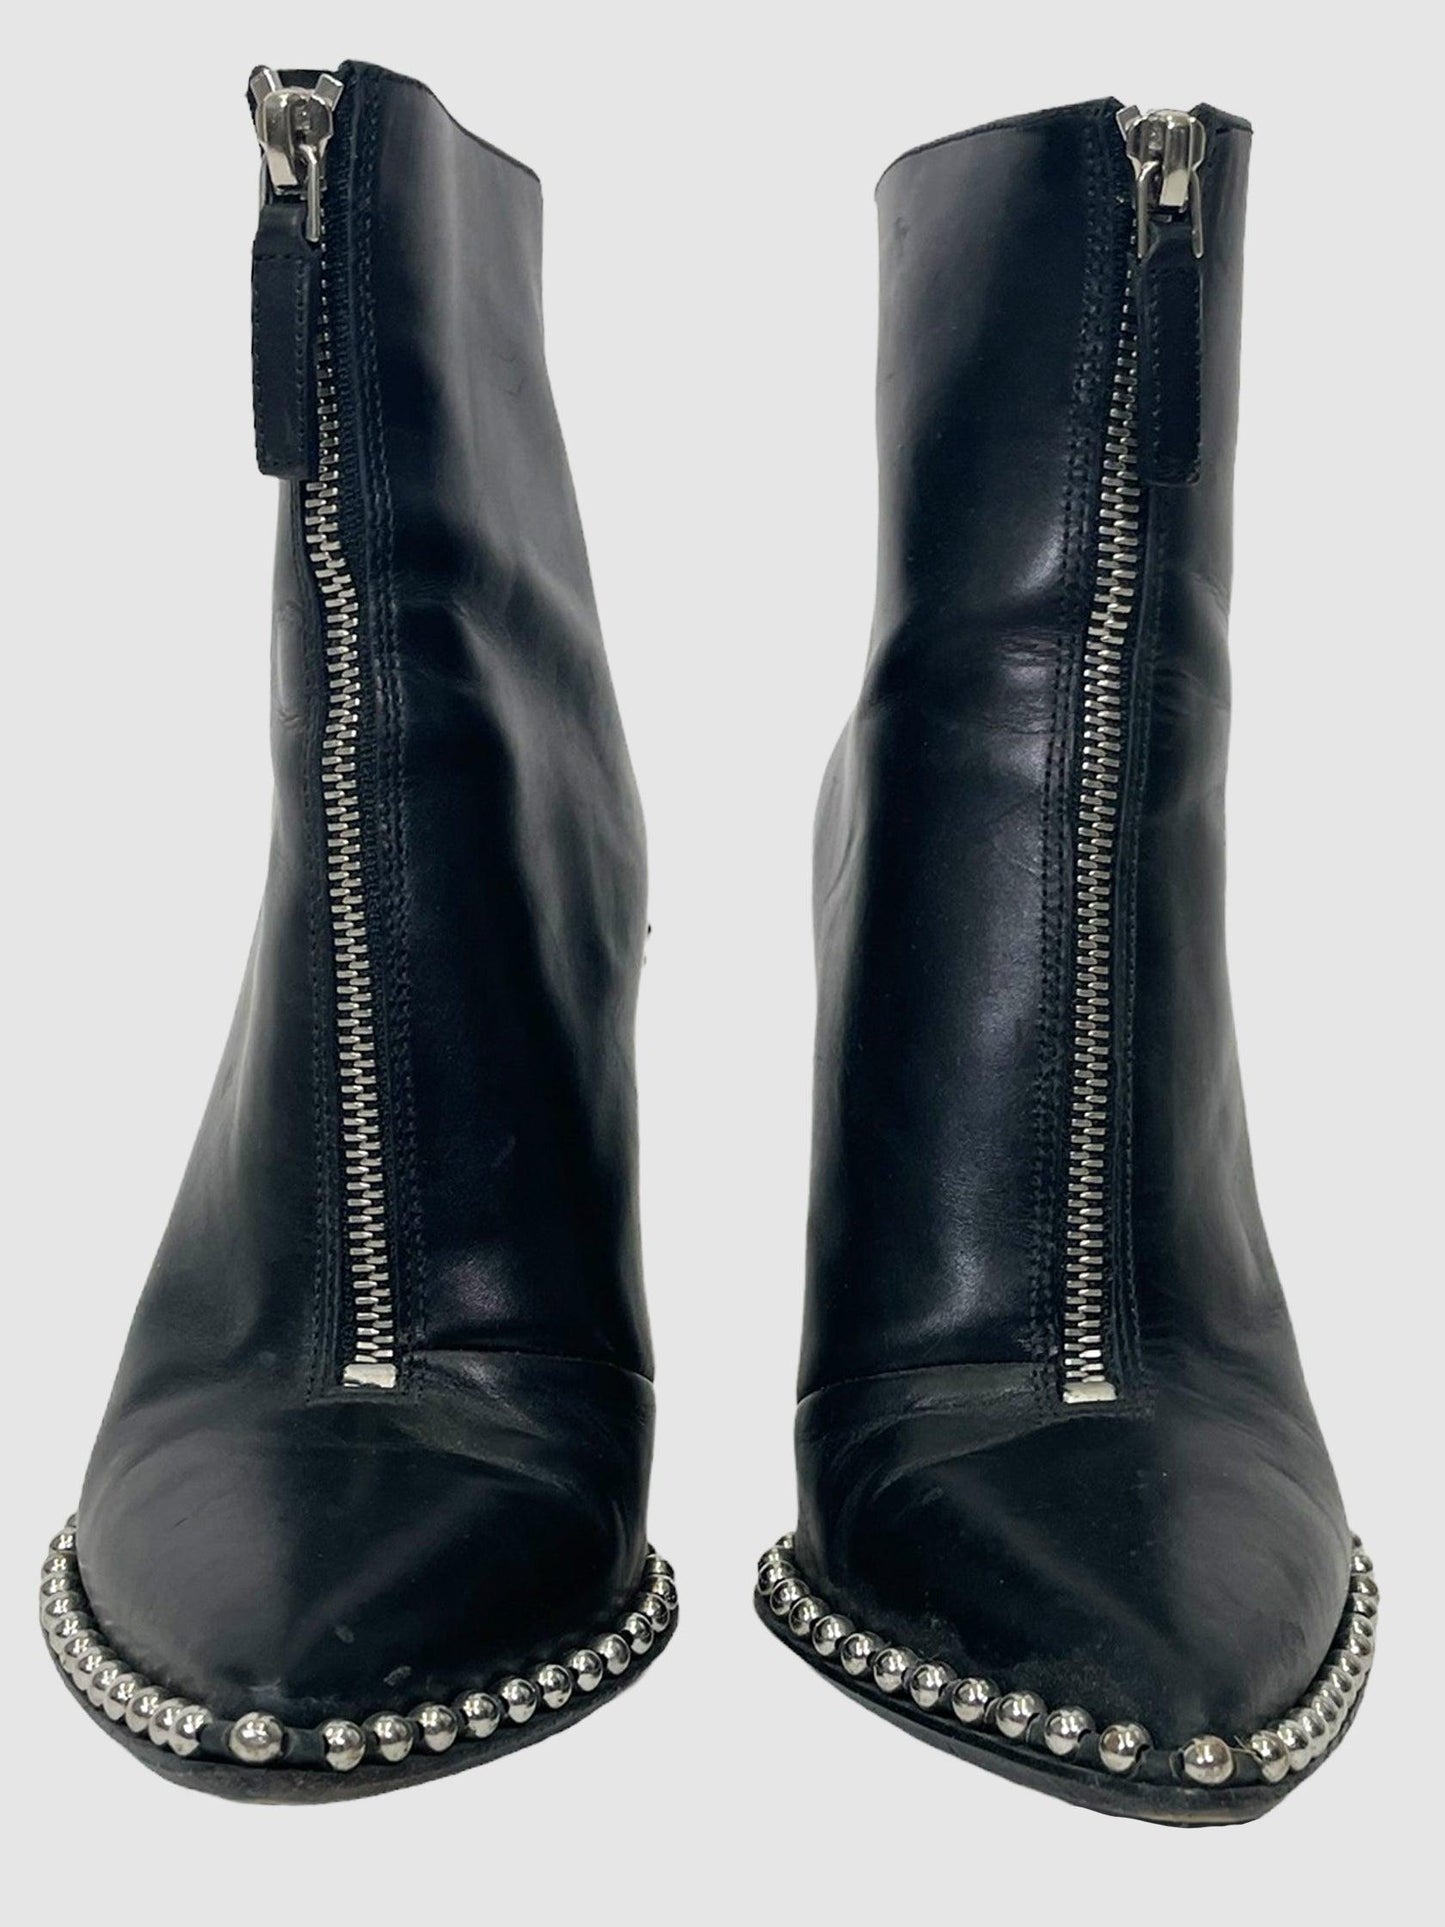 Alexander Wang Studded Black Heel Boots - Size 35 1/2 - Second Nature Boutique